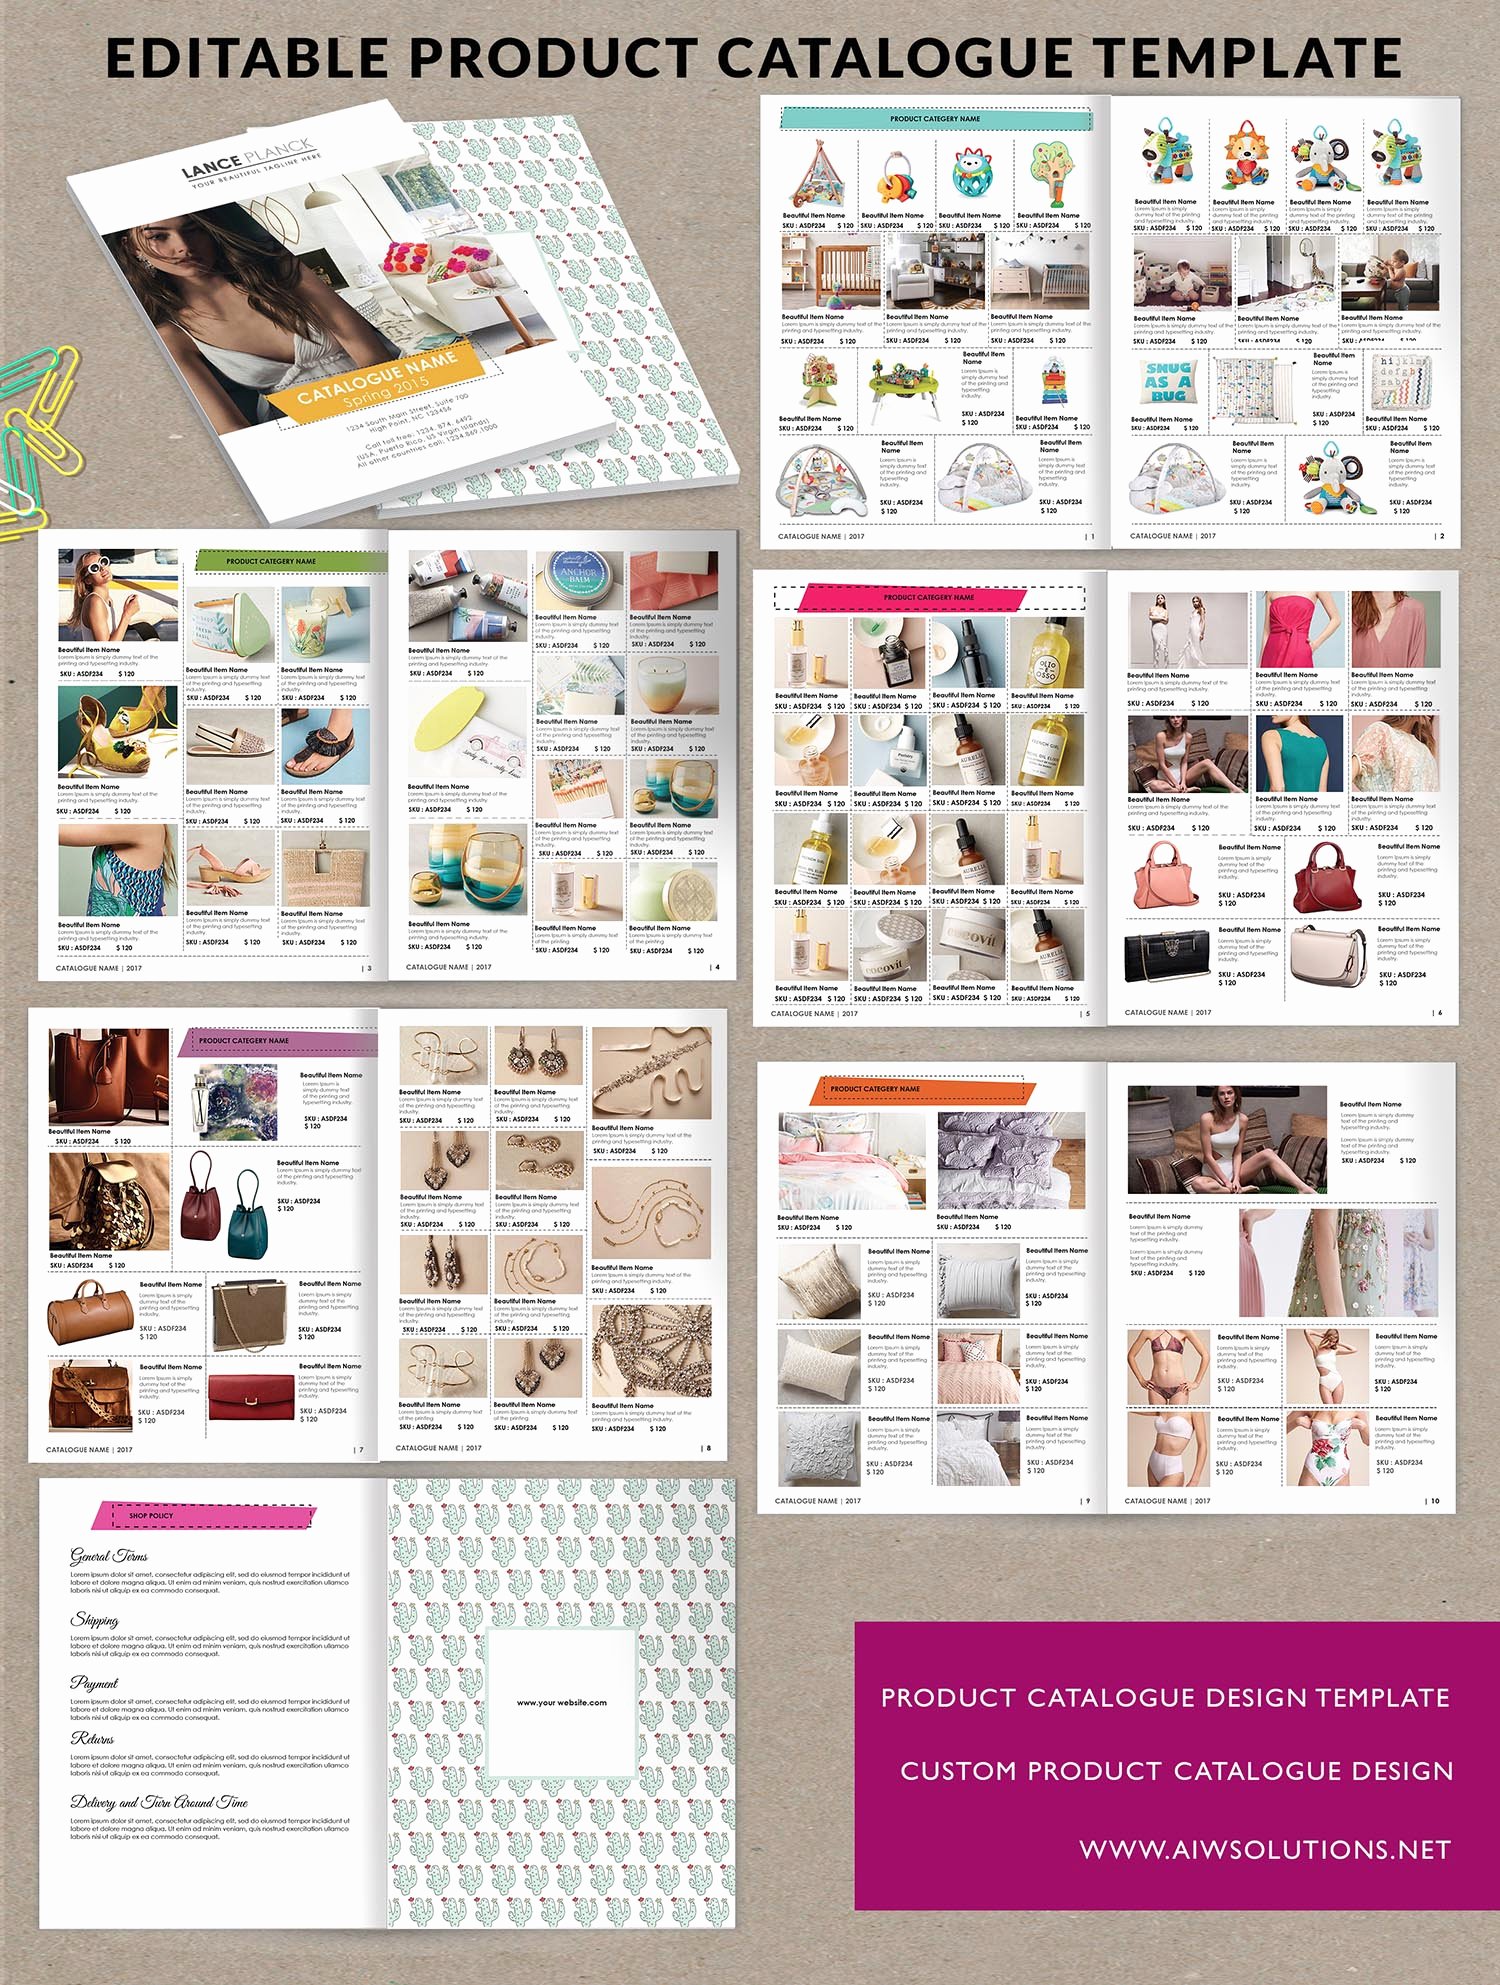 Product Catalogue Template Free Fresh Product Catalog Template for Hat Catalog Shoe Catalog